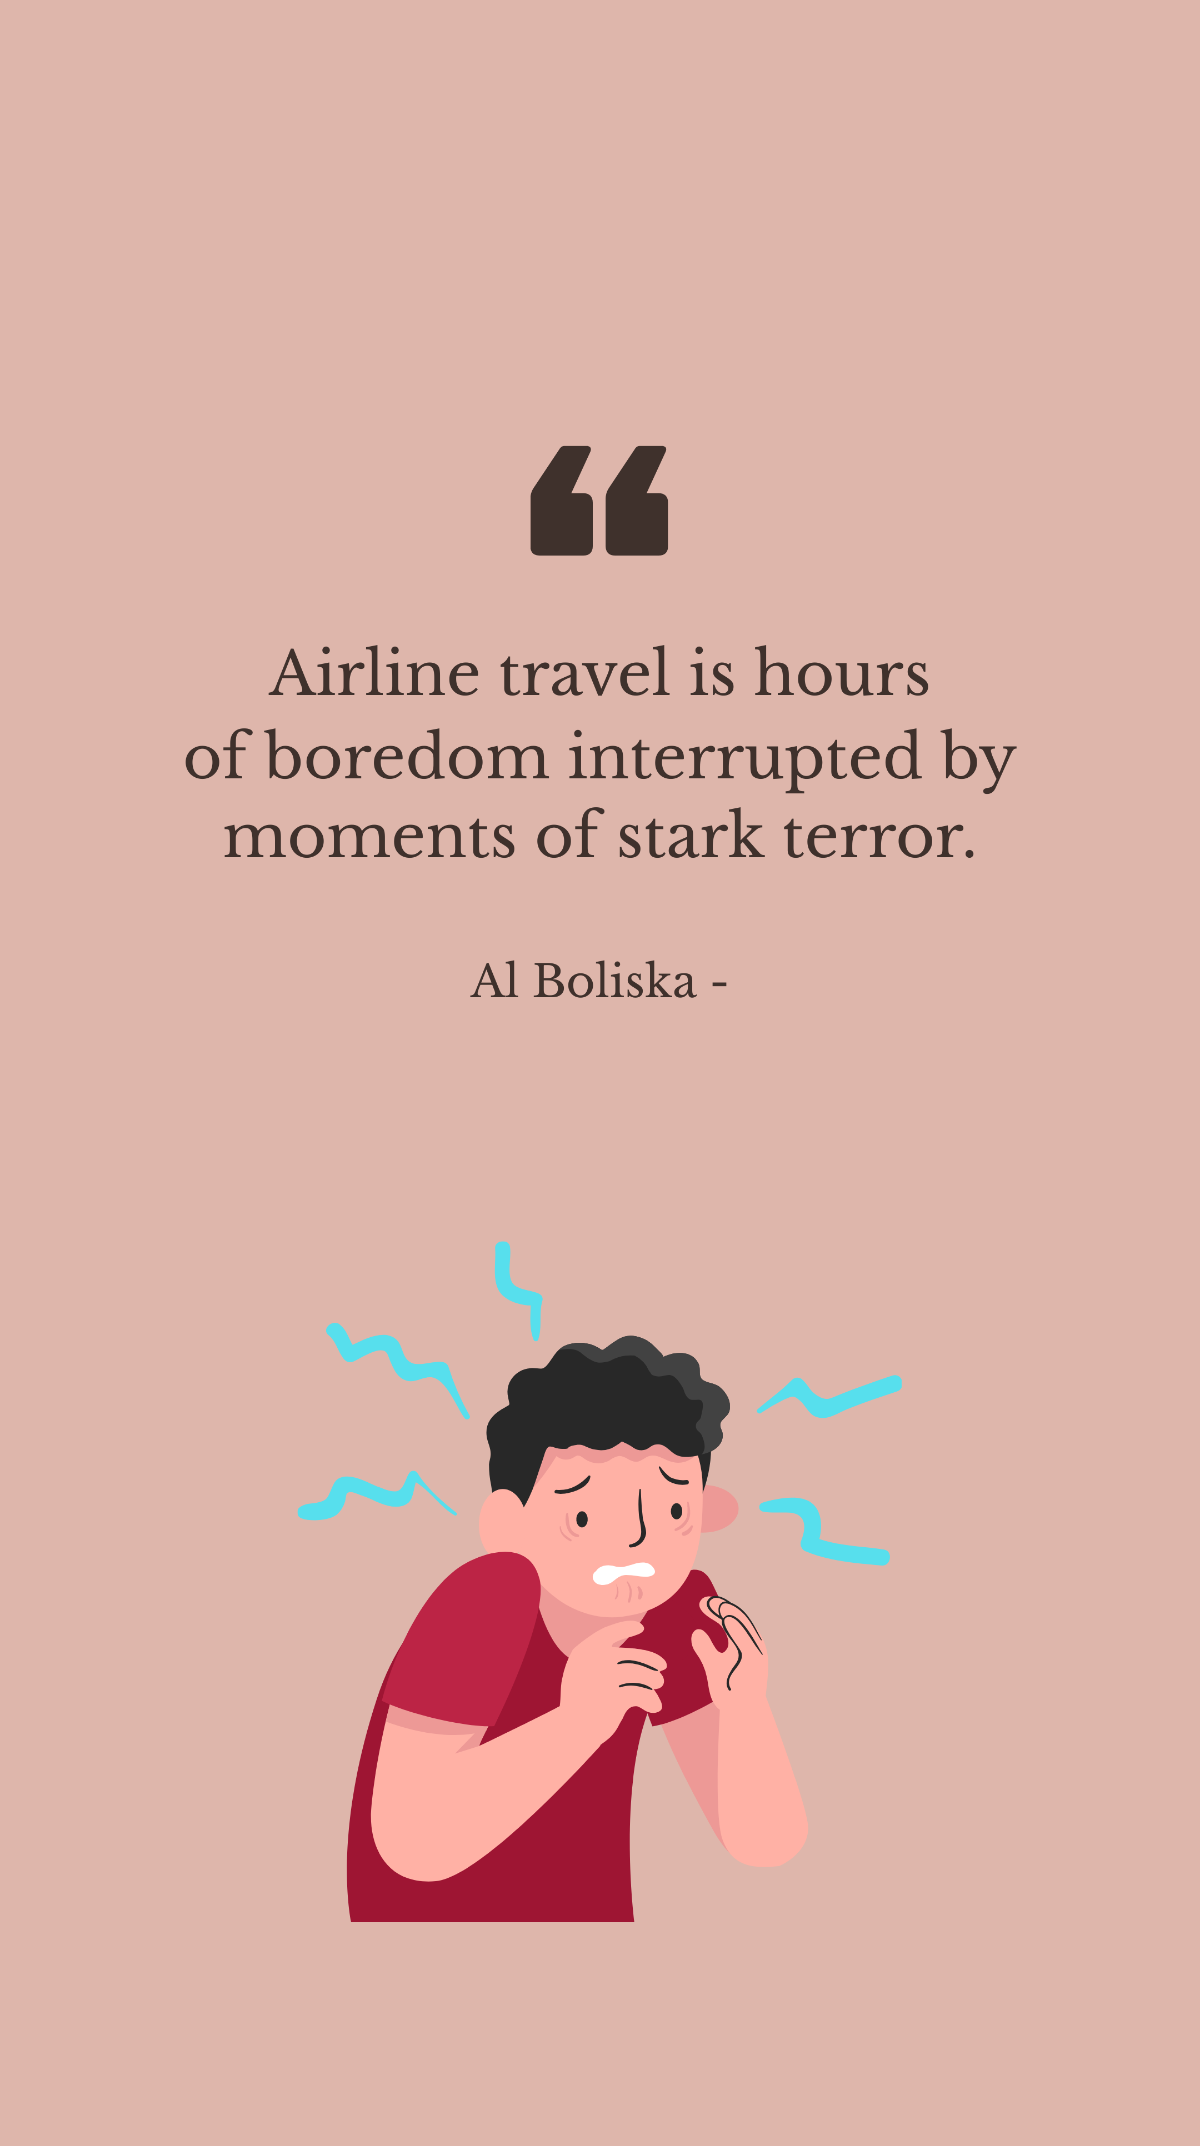 Al Boliska - Airline travel is hours of boredom interrupted by moments of stark terror. Template